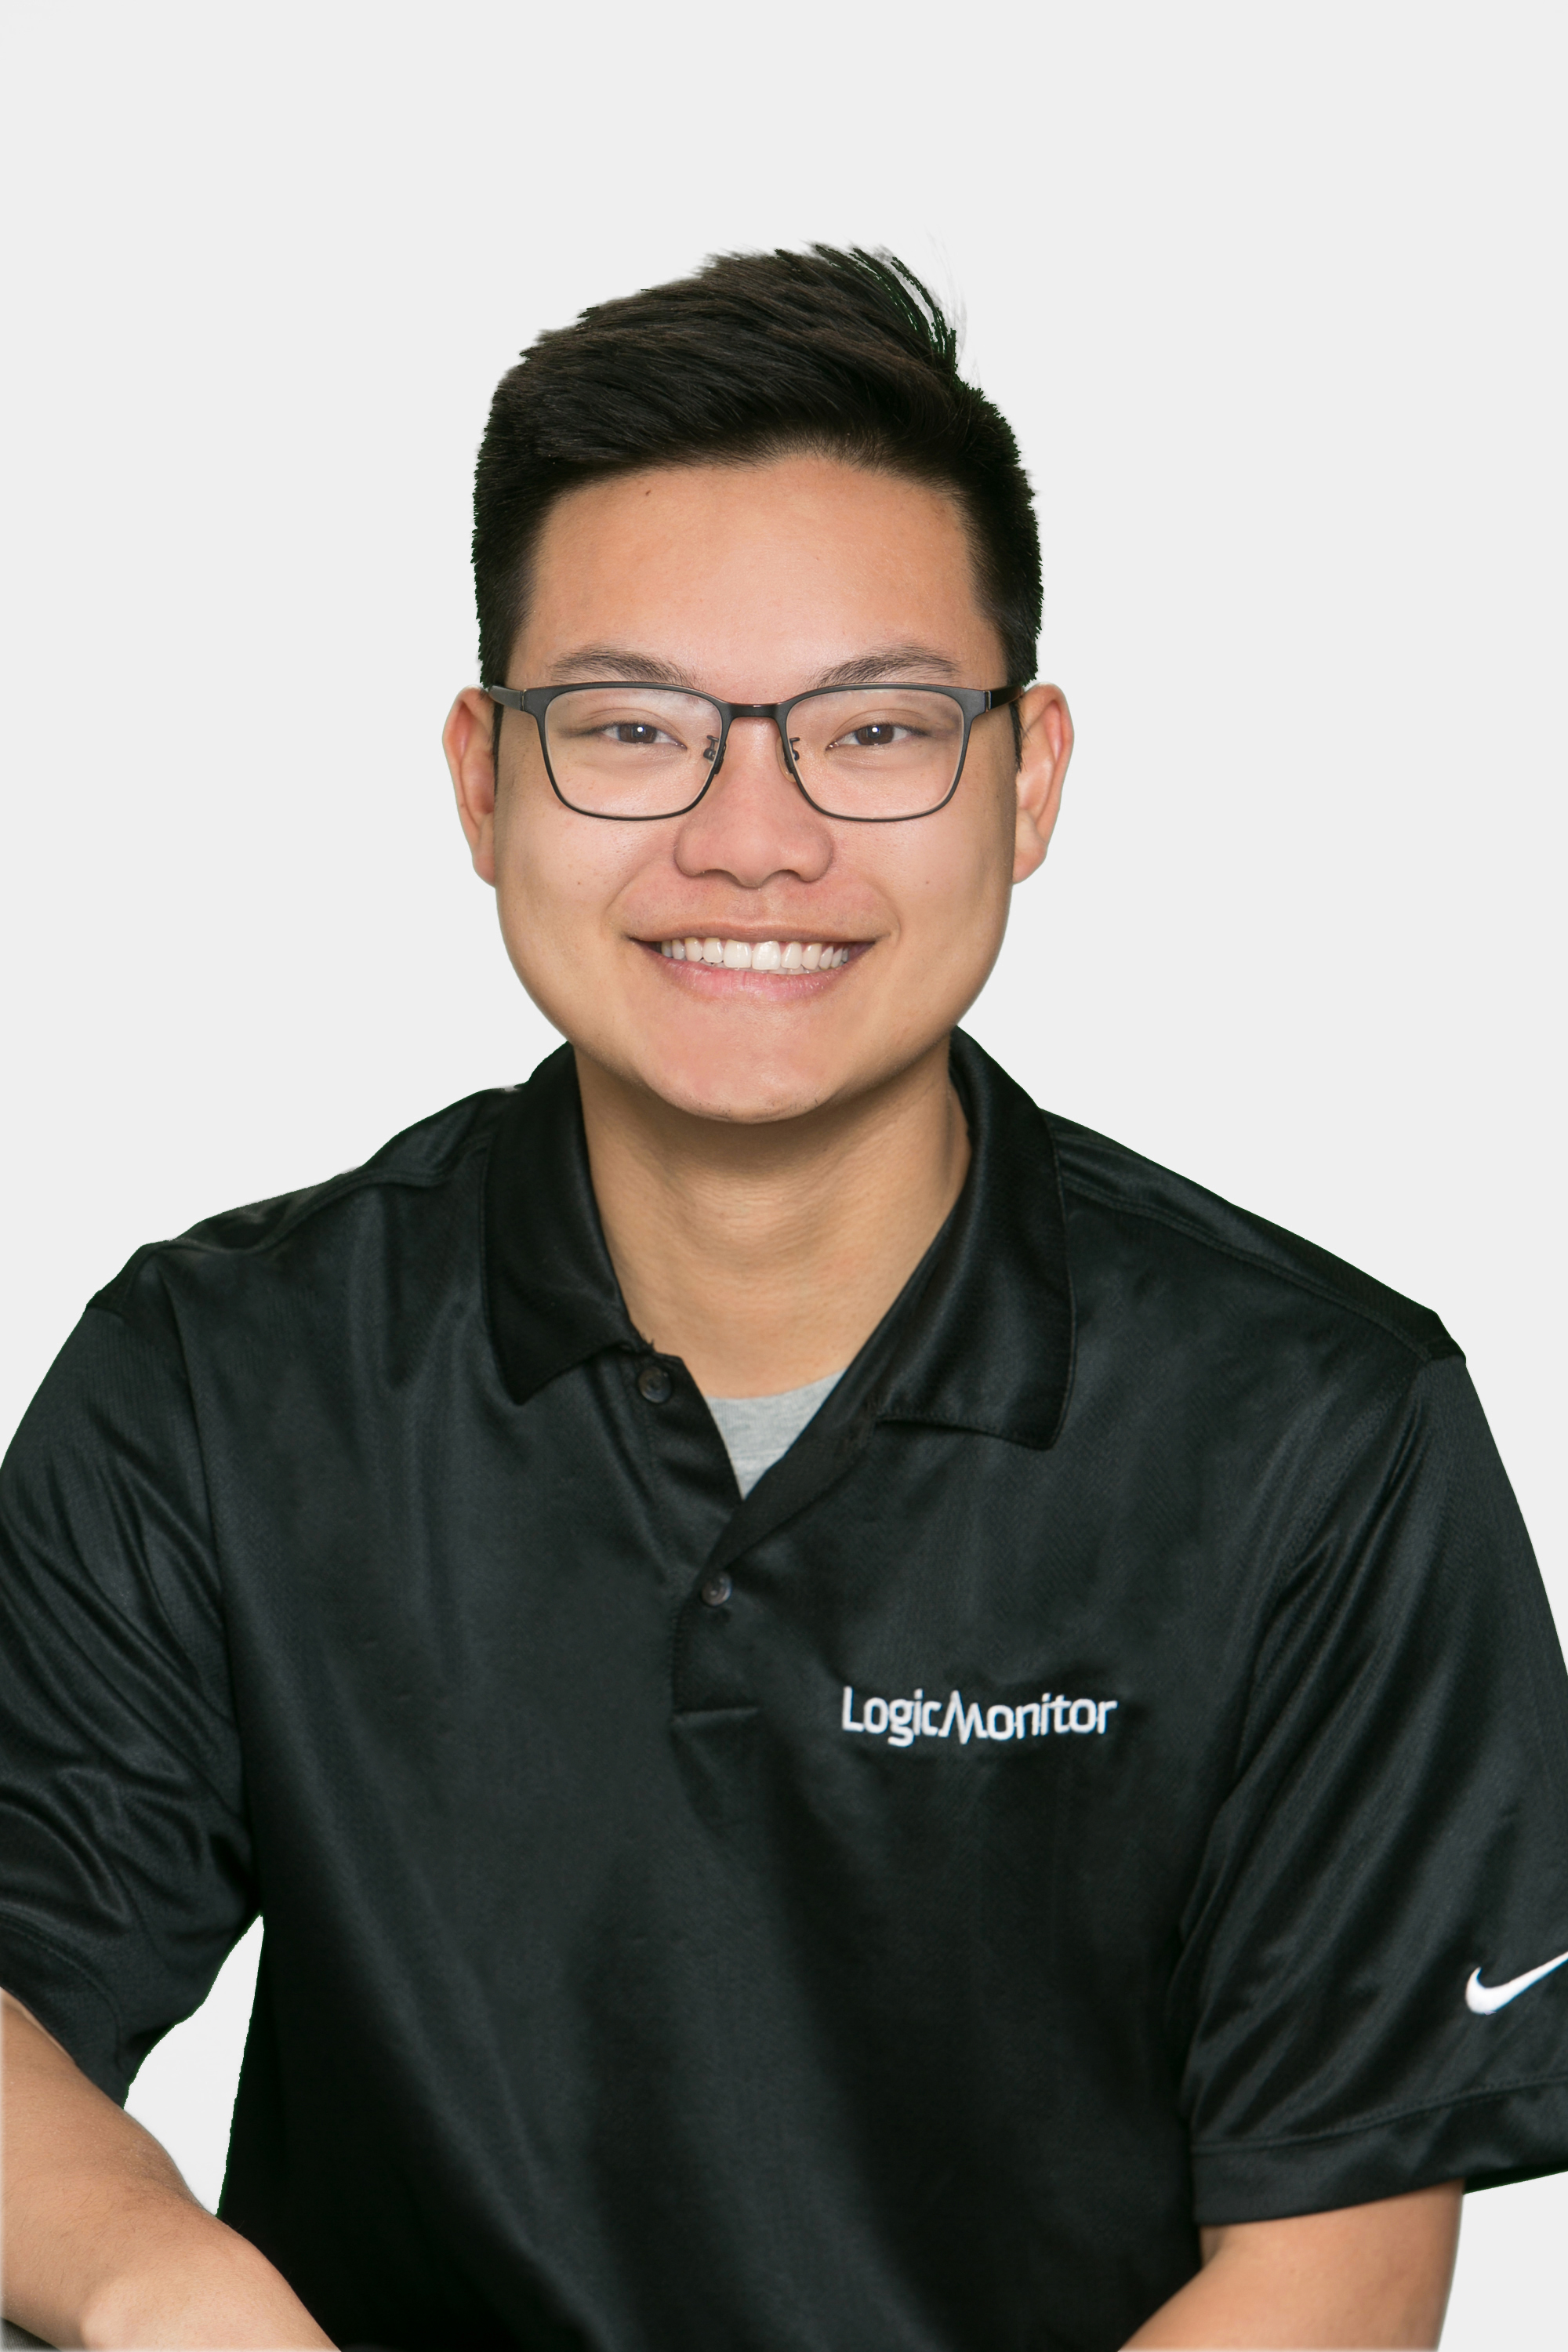 Ryan Cheng is a Team Lead, Business Development in Sydney, Australia at LogicMonitor